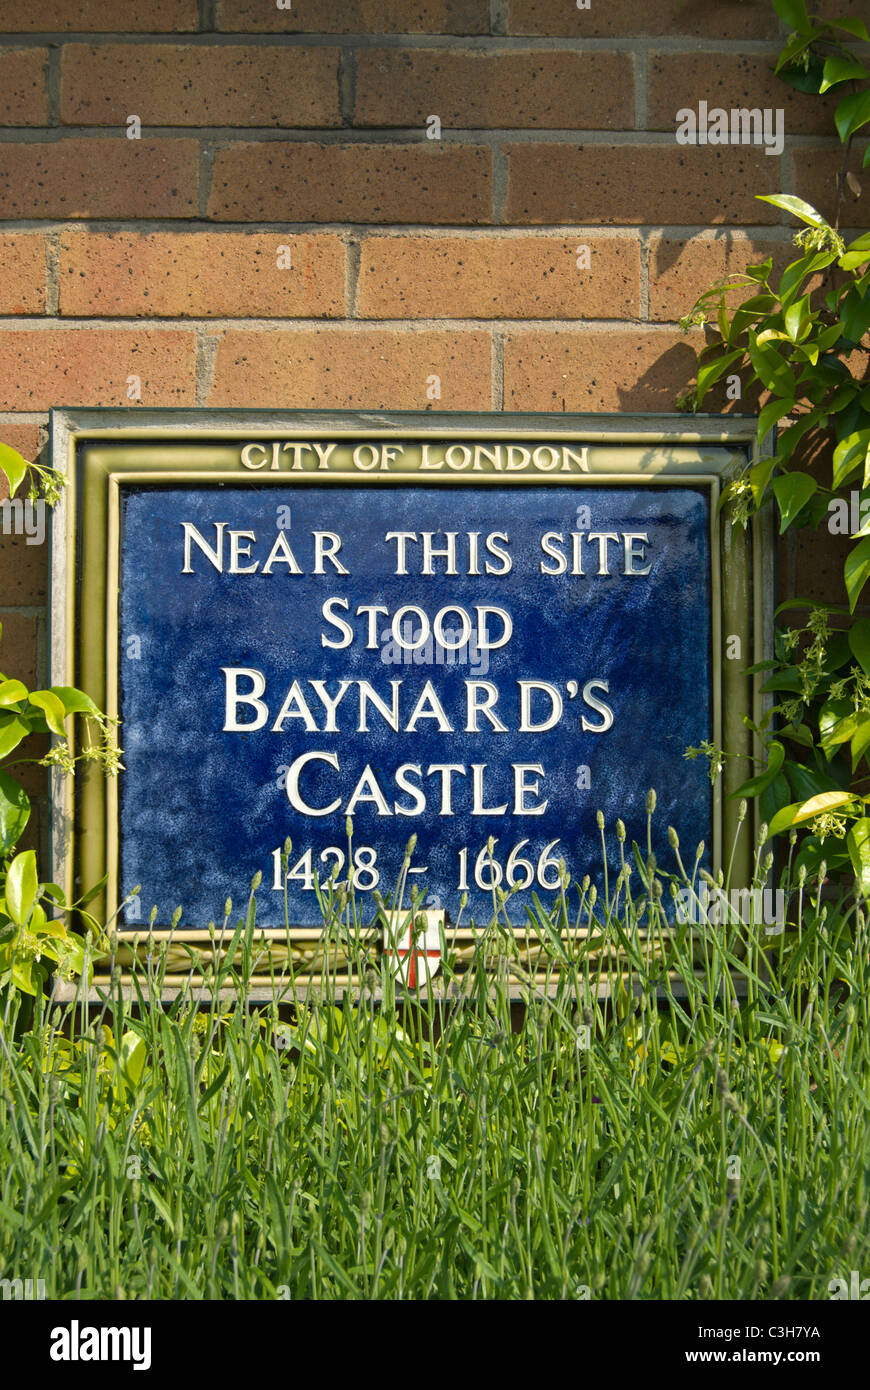 city of london blue plaque marking proximity to the site of baynard's castle,, a city landmark from 1428 to 1666 Stock Photo